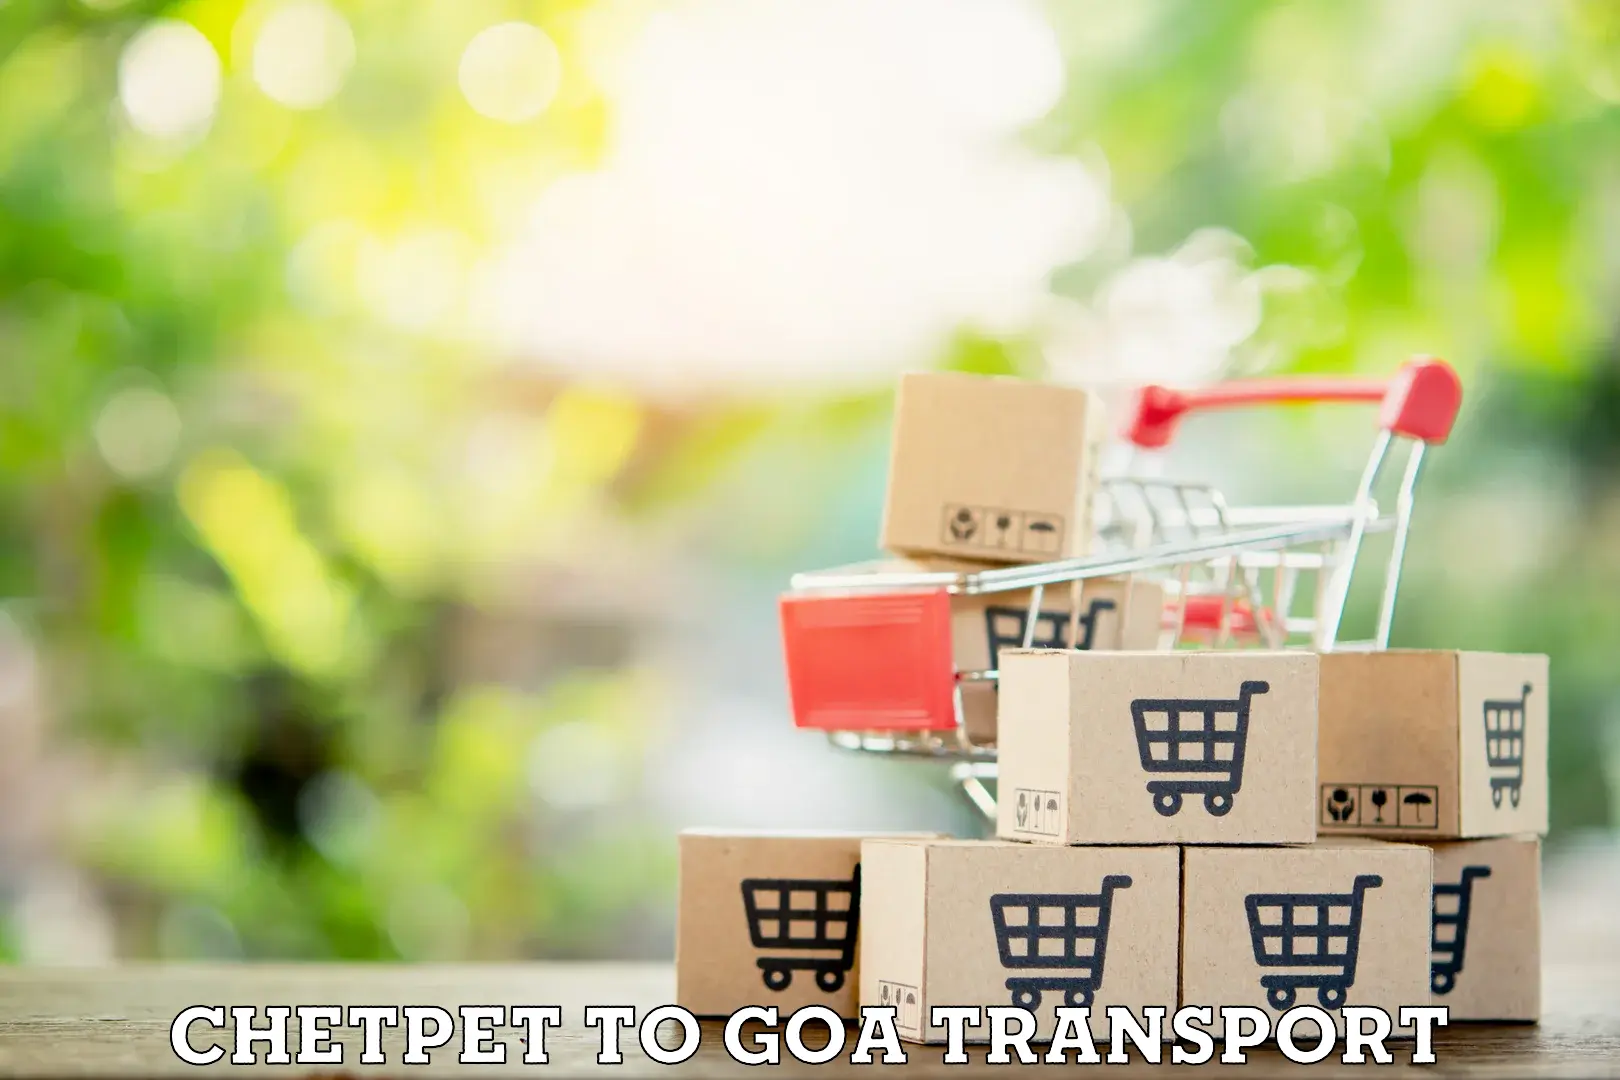 Transport in sharing Chetpet to IIT Goa